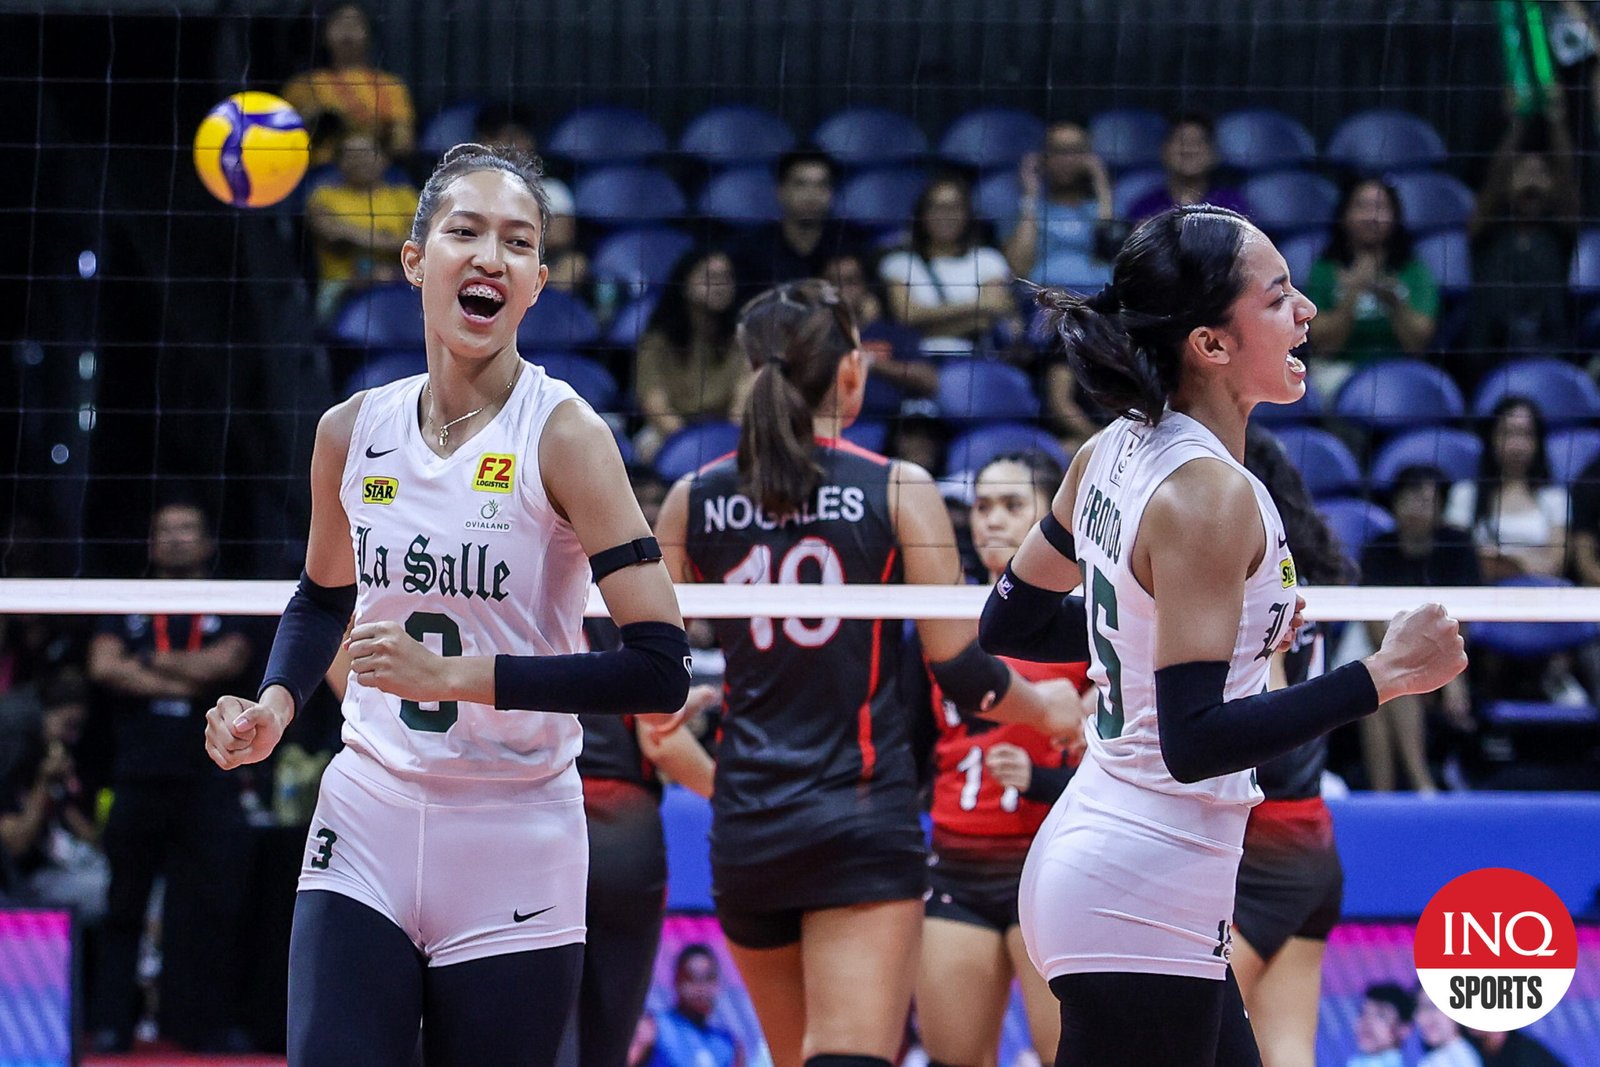 Thea Gagate keeps La Salle afloat in two tough wins